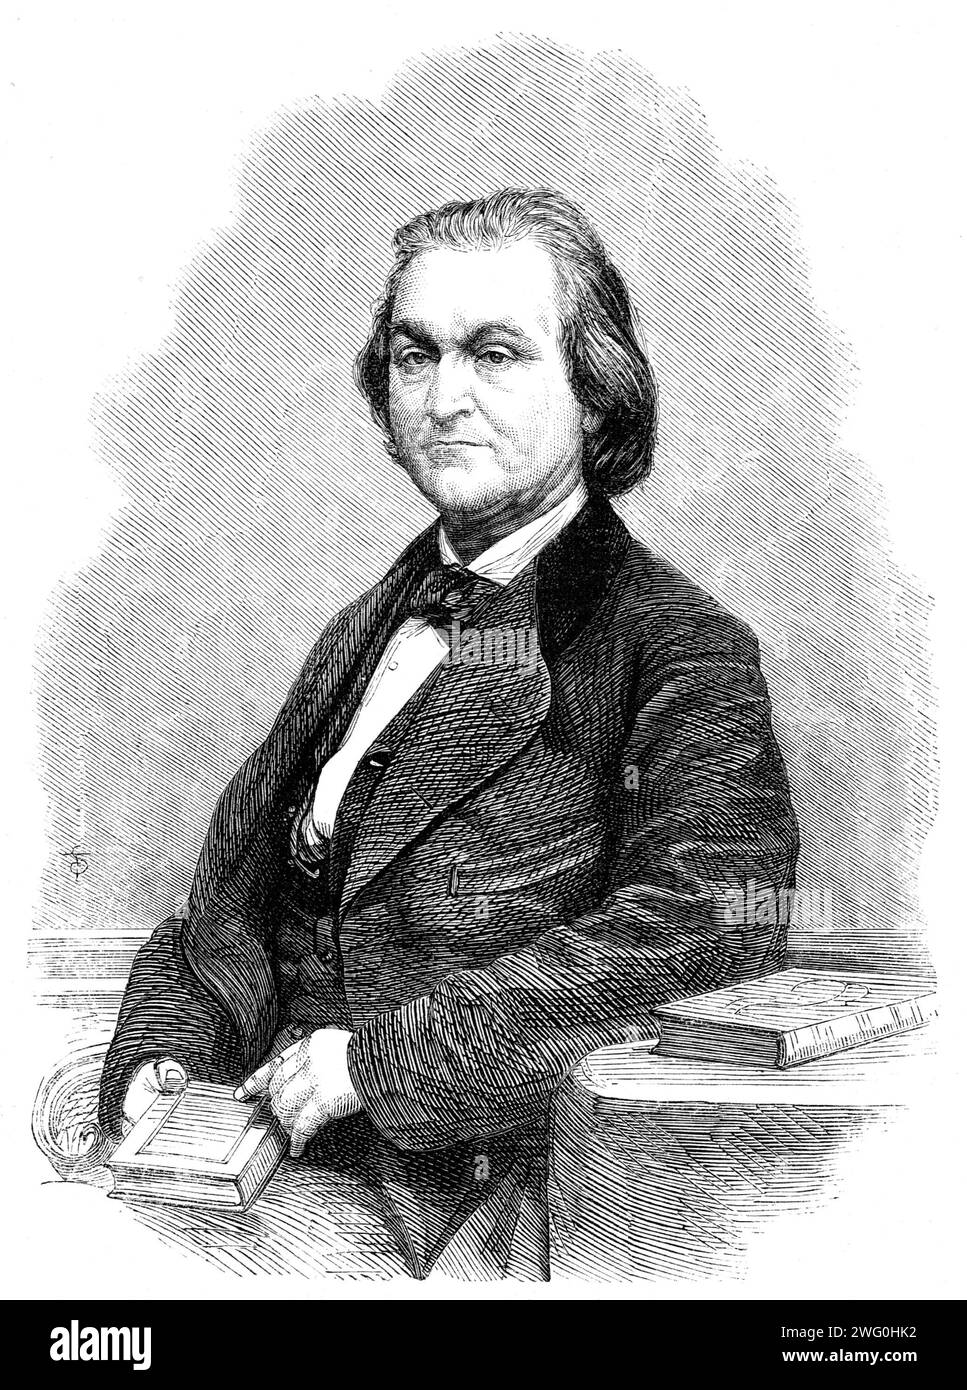 Mr. Yancey, one of the commissioners from the Confederate States of America to the European Courts, 1862. Portrait from a photograph by Mayall. 'Mr. Yancey's chief claim to public notice rests in his early recognition of the ineradicable differences existing between the North and South [USA], and which time, instead of diminishing, extended and strengthened...he predicted that the Union would be dissolved whenever they stood arrayed as sections, the one against the other...In selecting three gentlemen to form a commission to the Powers of Europe to present the claims of the Confederate States Stock Photo